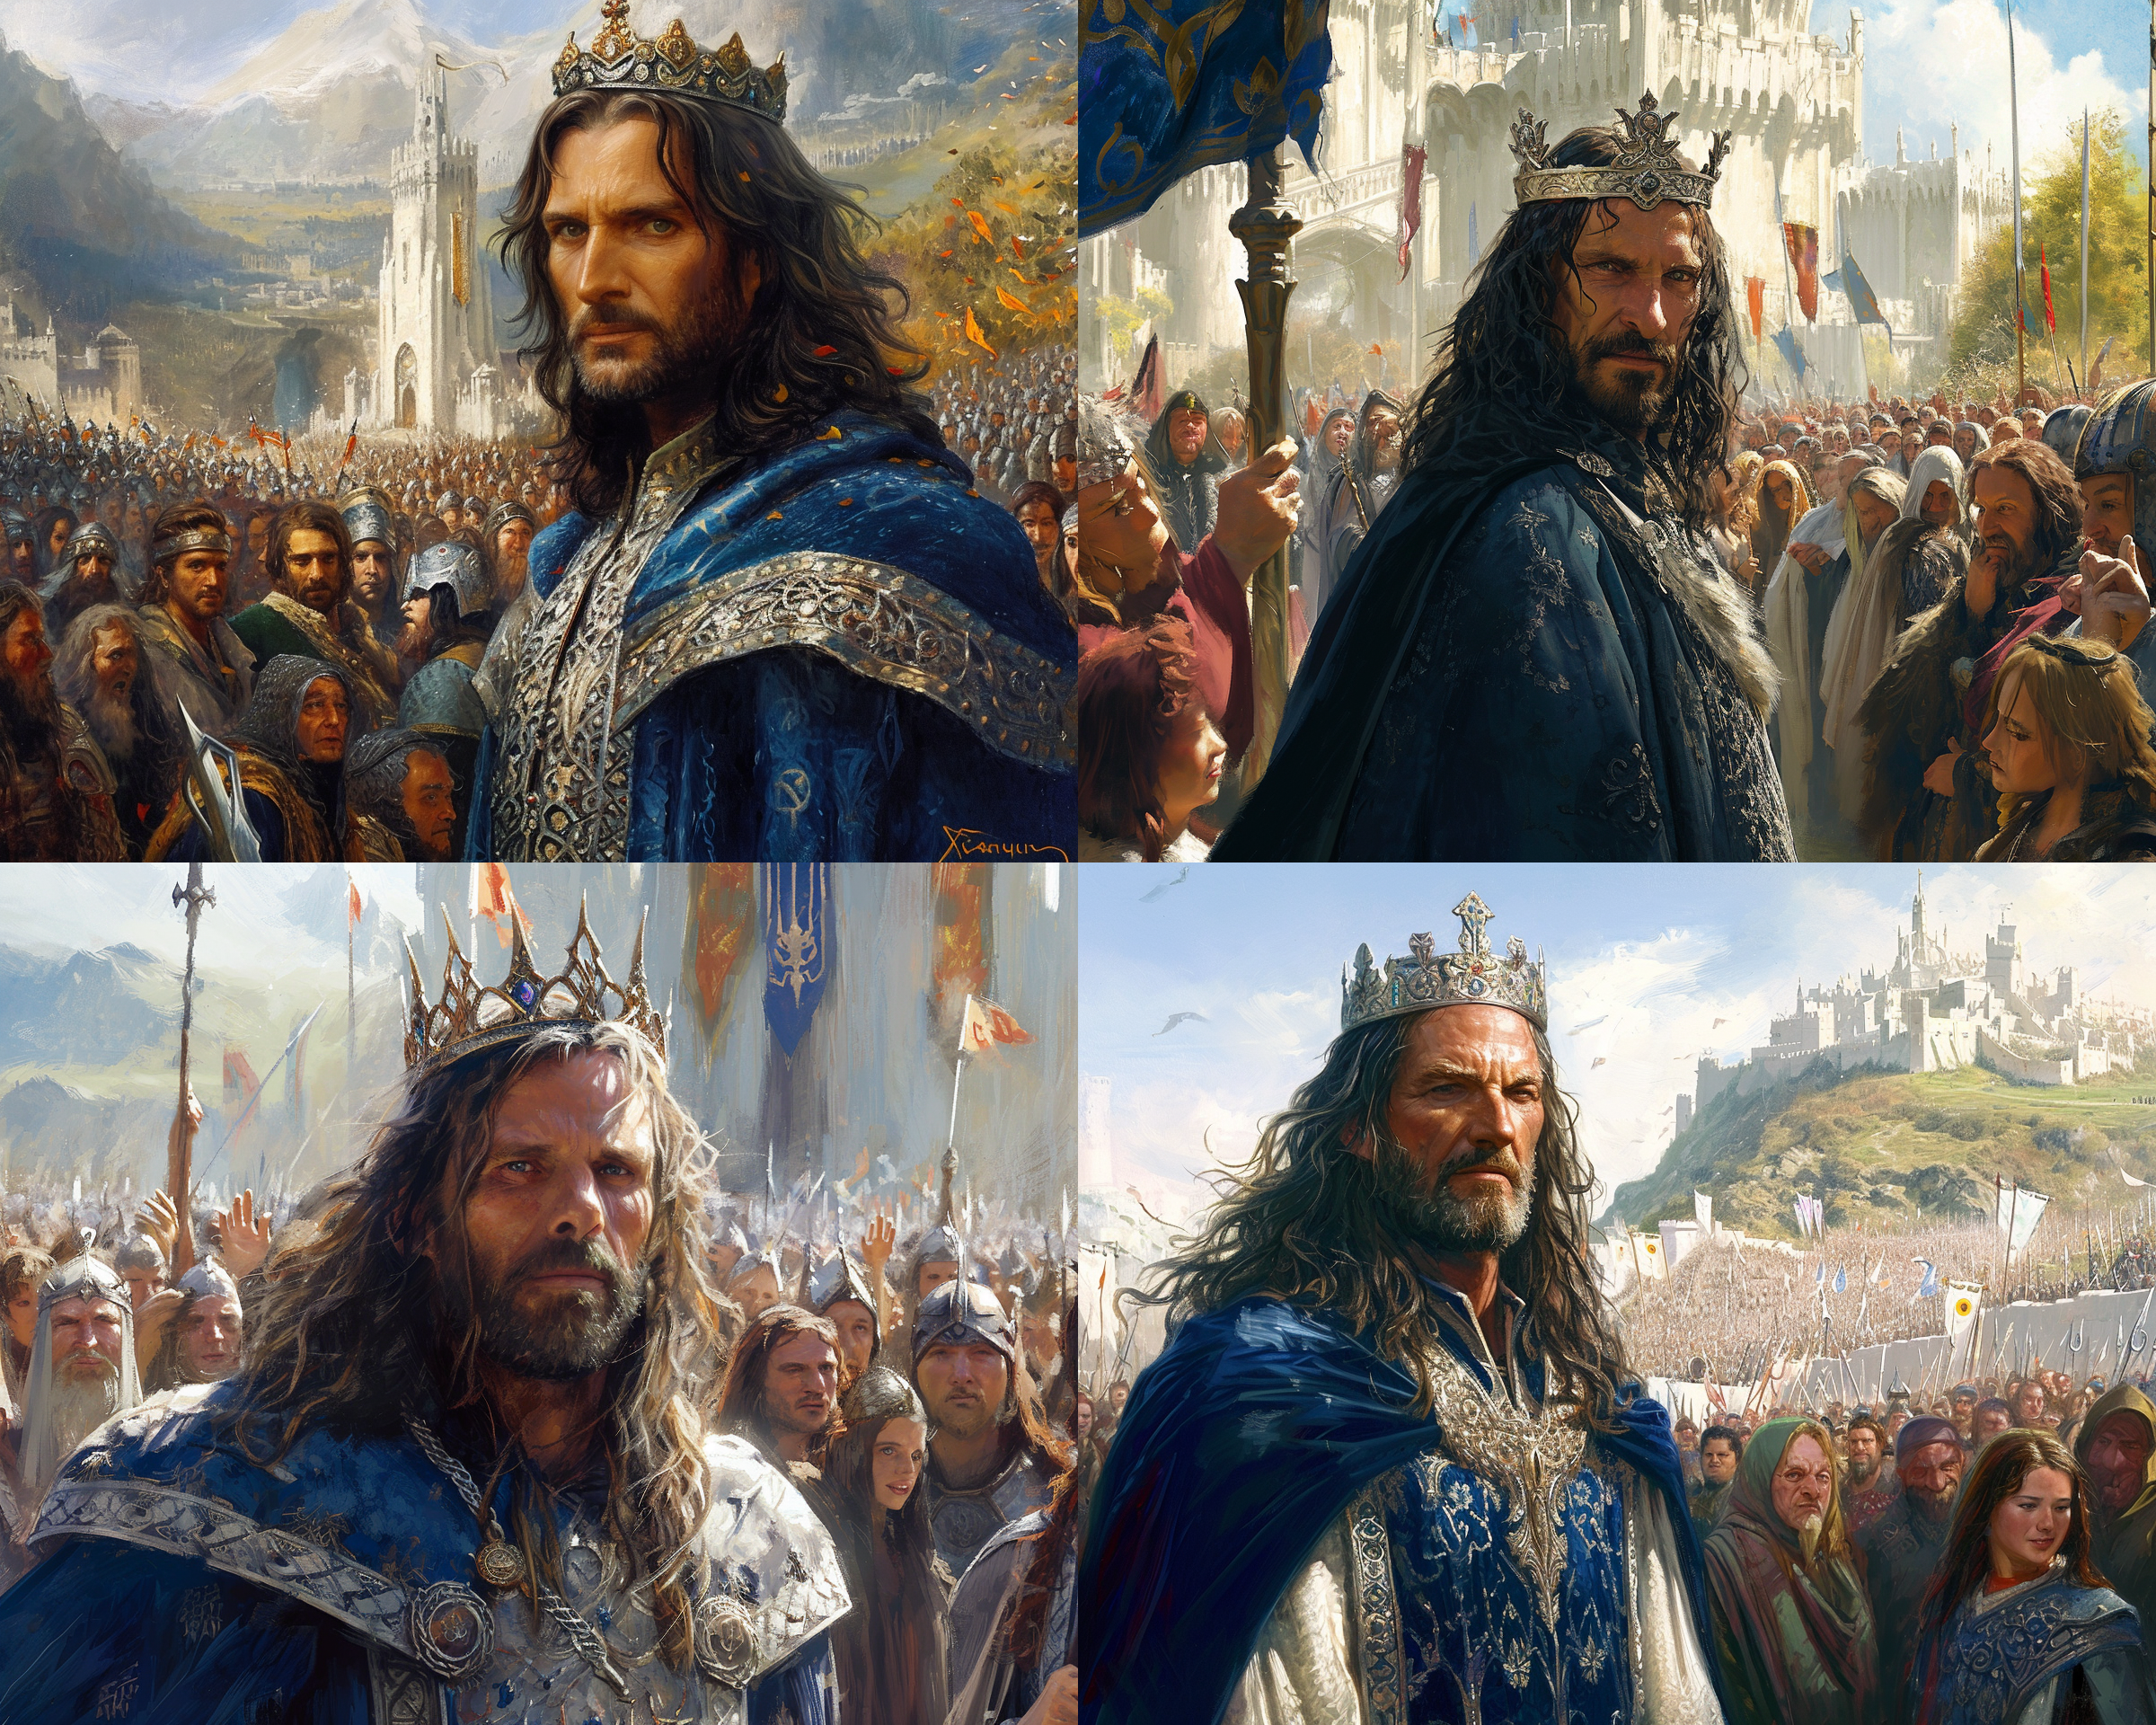 The crowning of Aragorn as King of Gondor